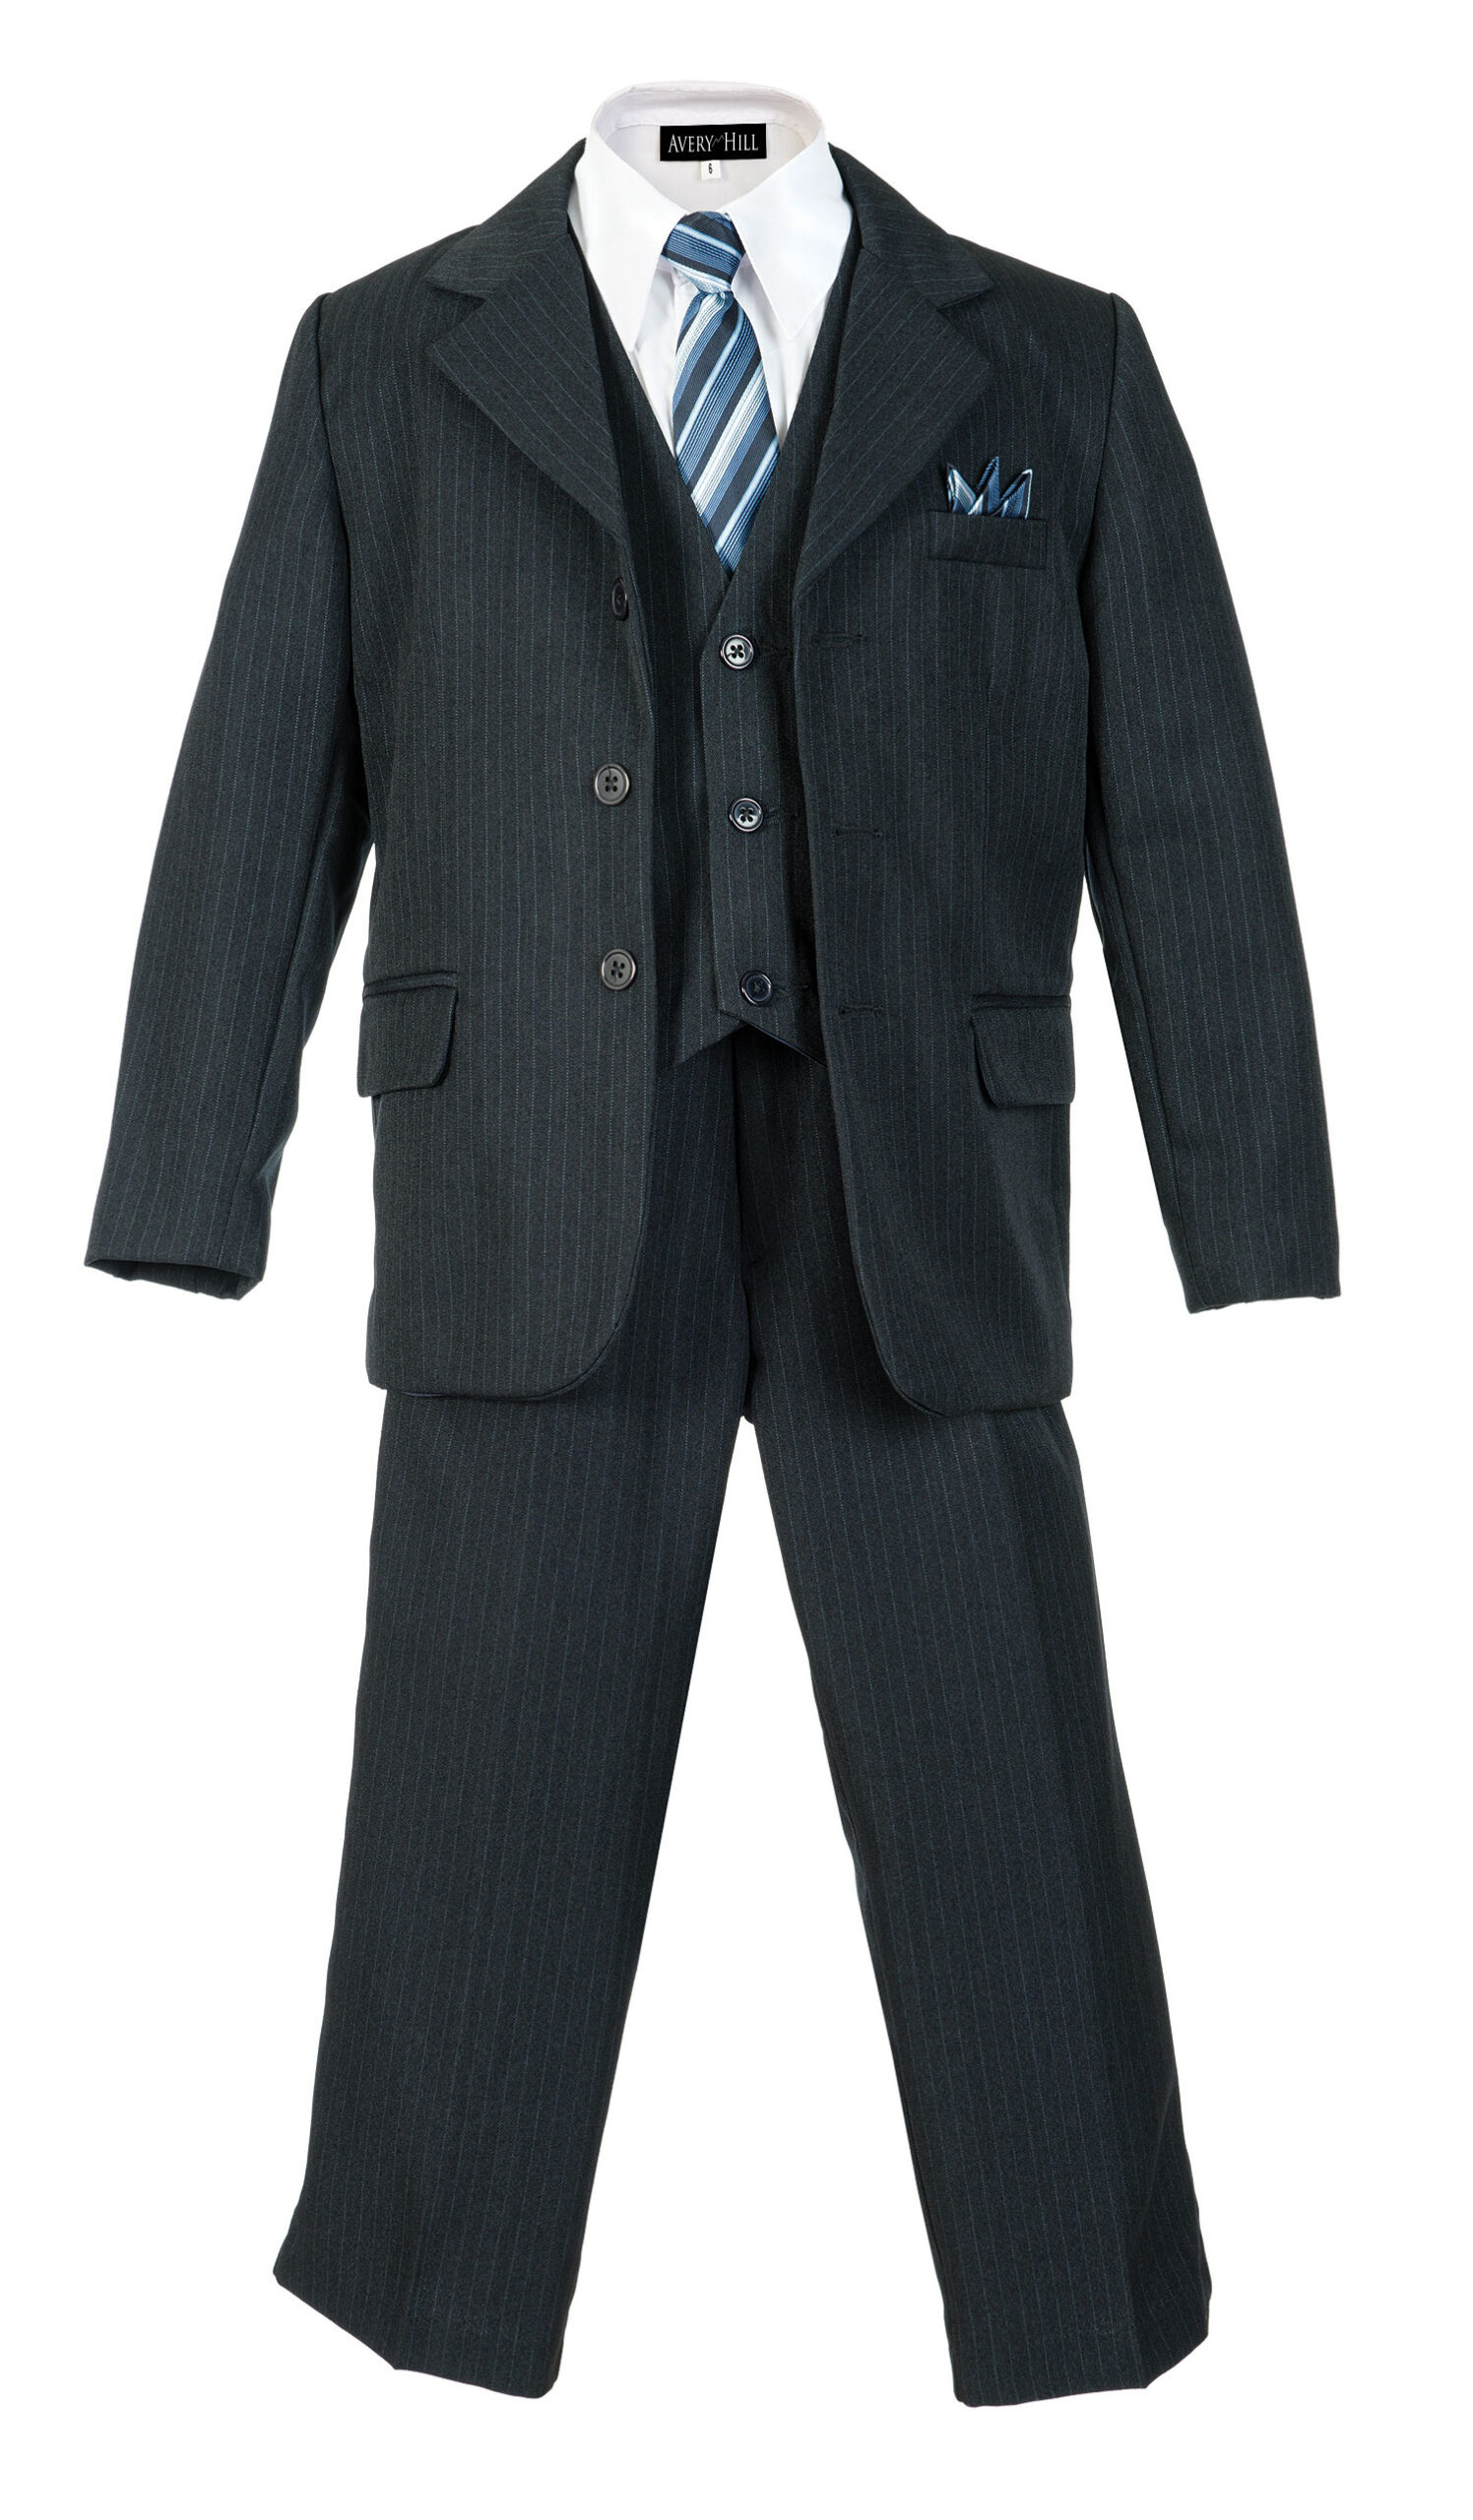 Boys Pinstripe Suit Set with Matching Tie NB 5